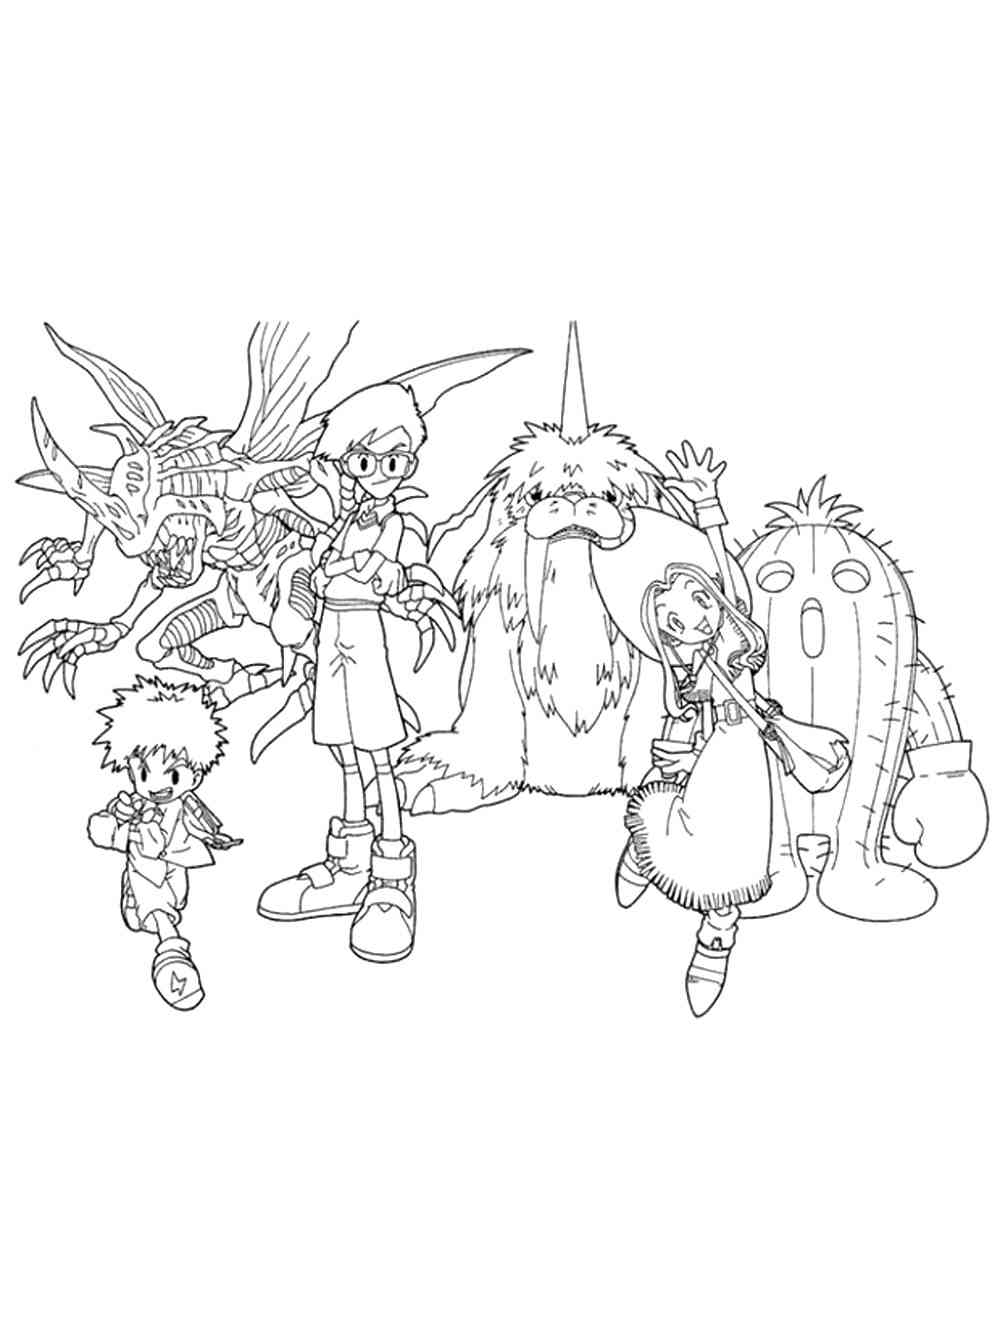 Digimon 16 coloring page